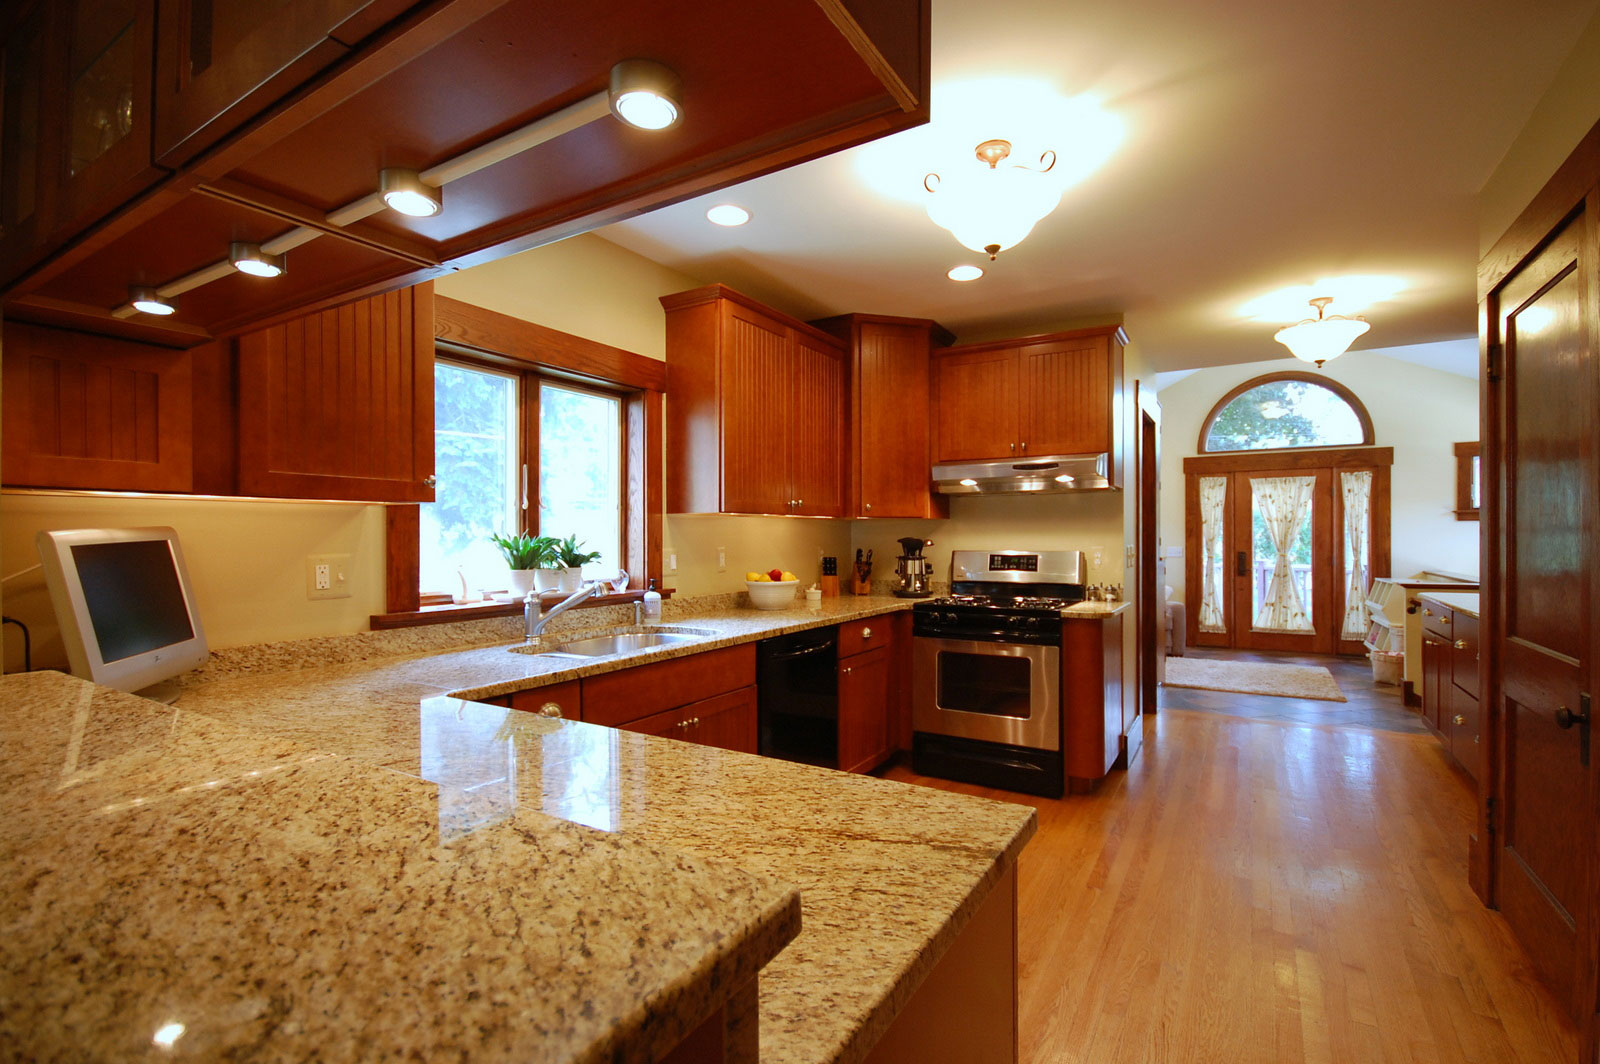 Kitchen Design With Contemporary Kitchen Design Interior Decorated With Marvelous Wooden Kitchen Cabinet And Cream Granite Kitchen Countertops Decor Popular Granite Kitchen Countertops You Can Recreate At Home!